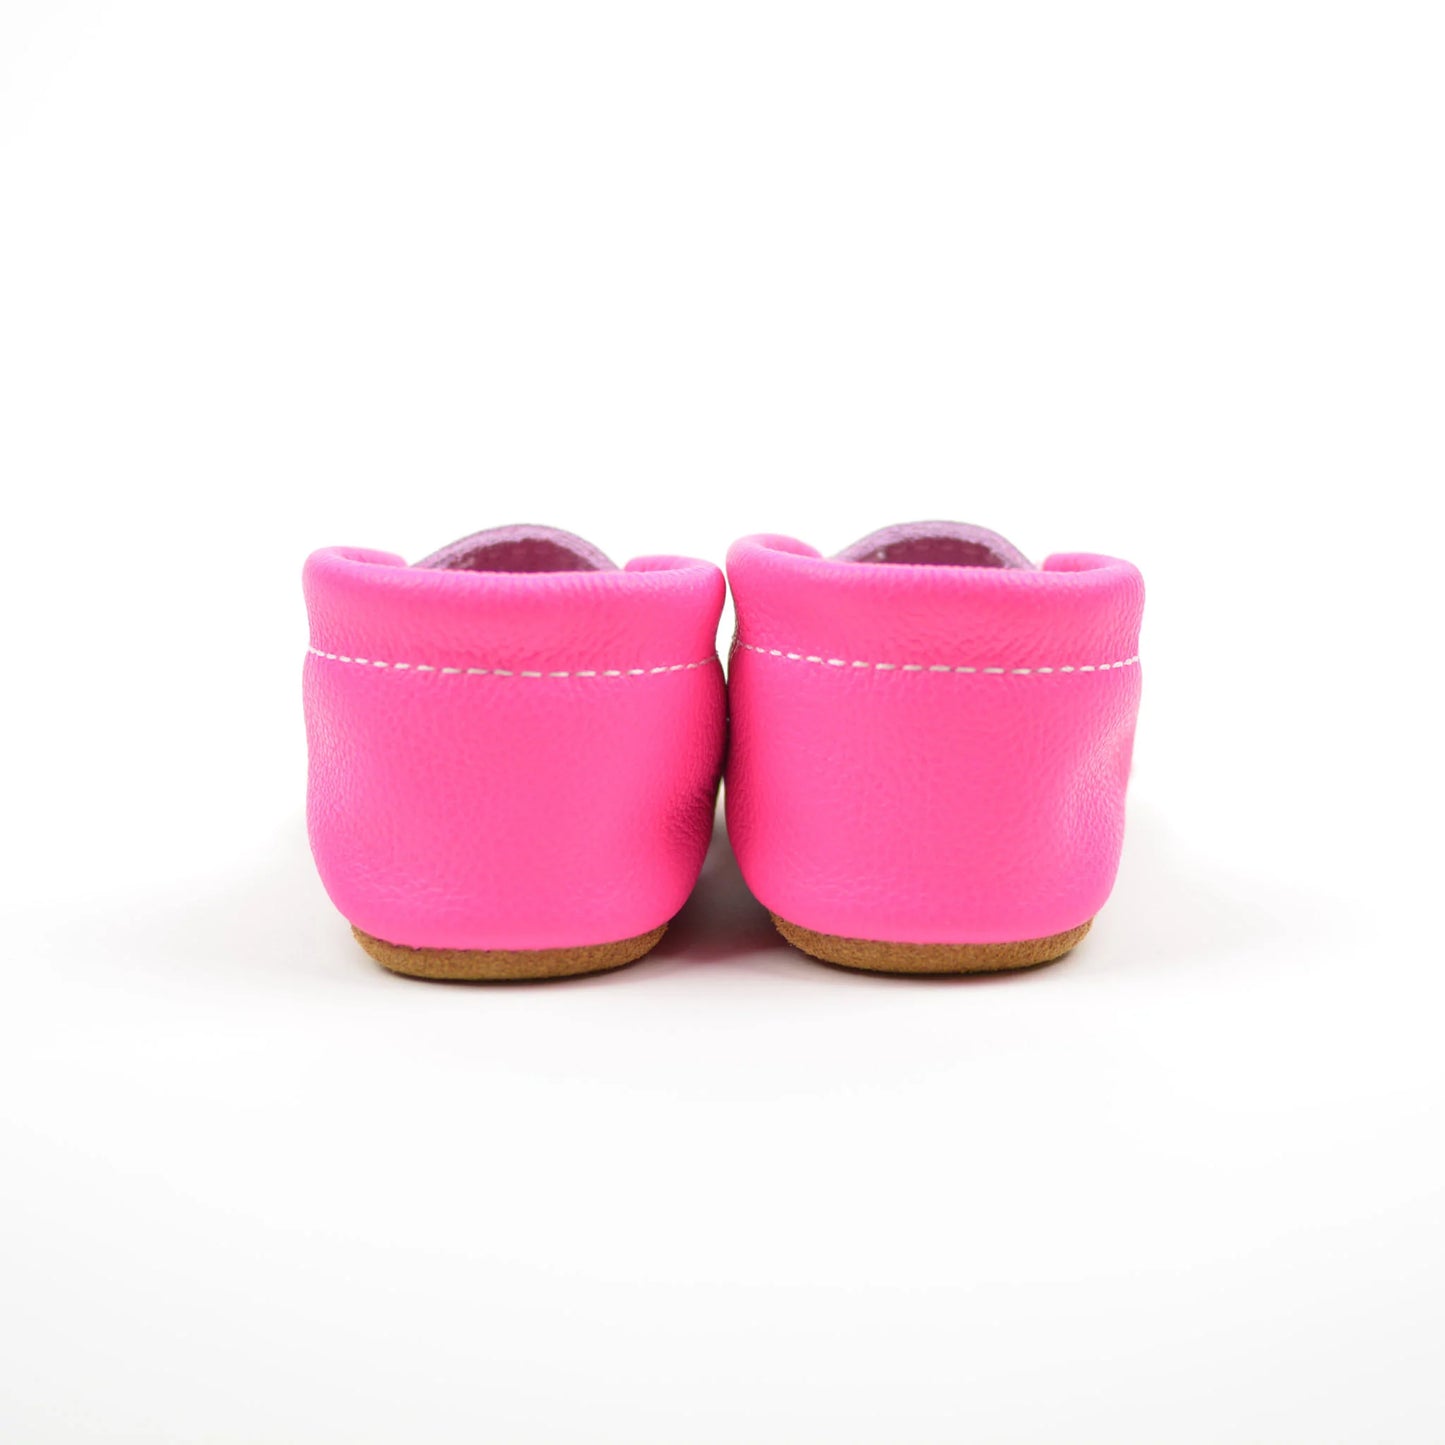 RTS Fiesta Neon Pink Bow Moccasins - Size 2 (6-12M) (4.5")